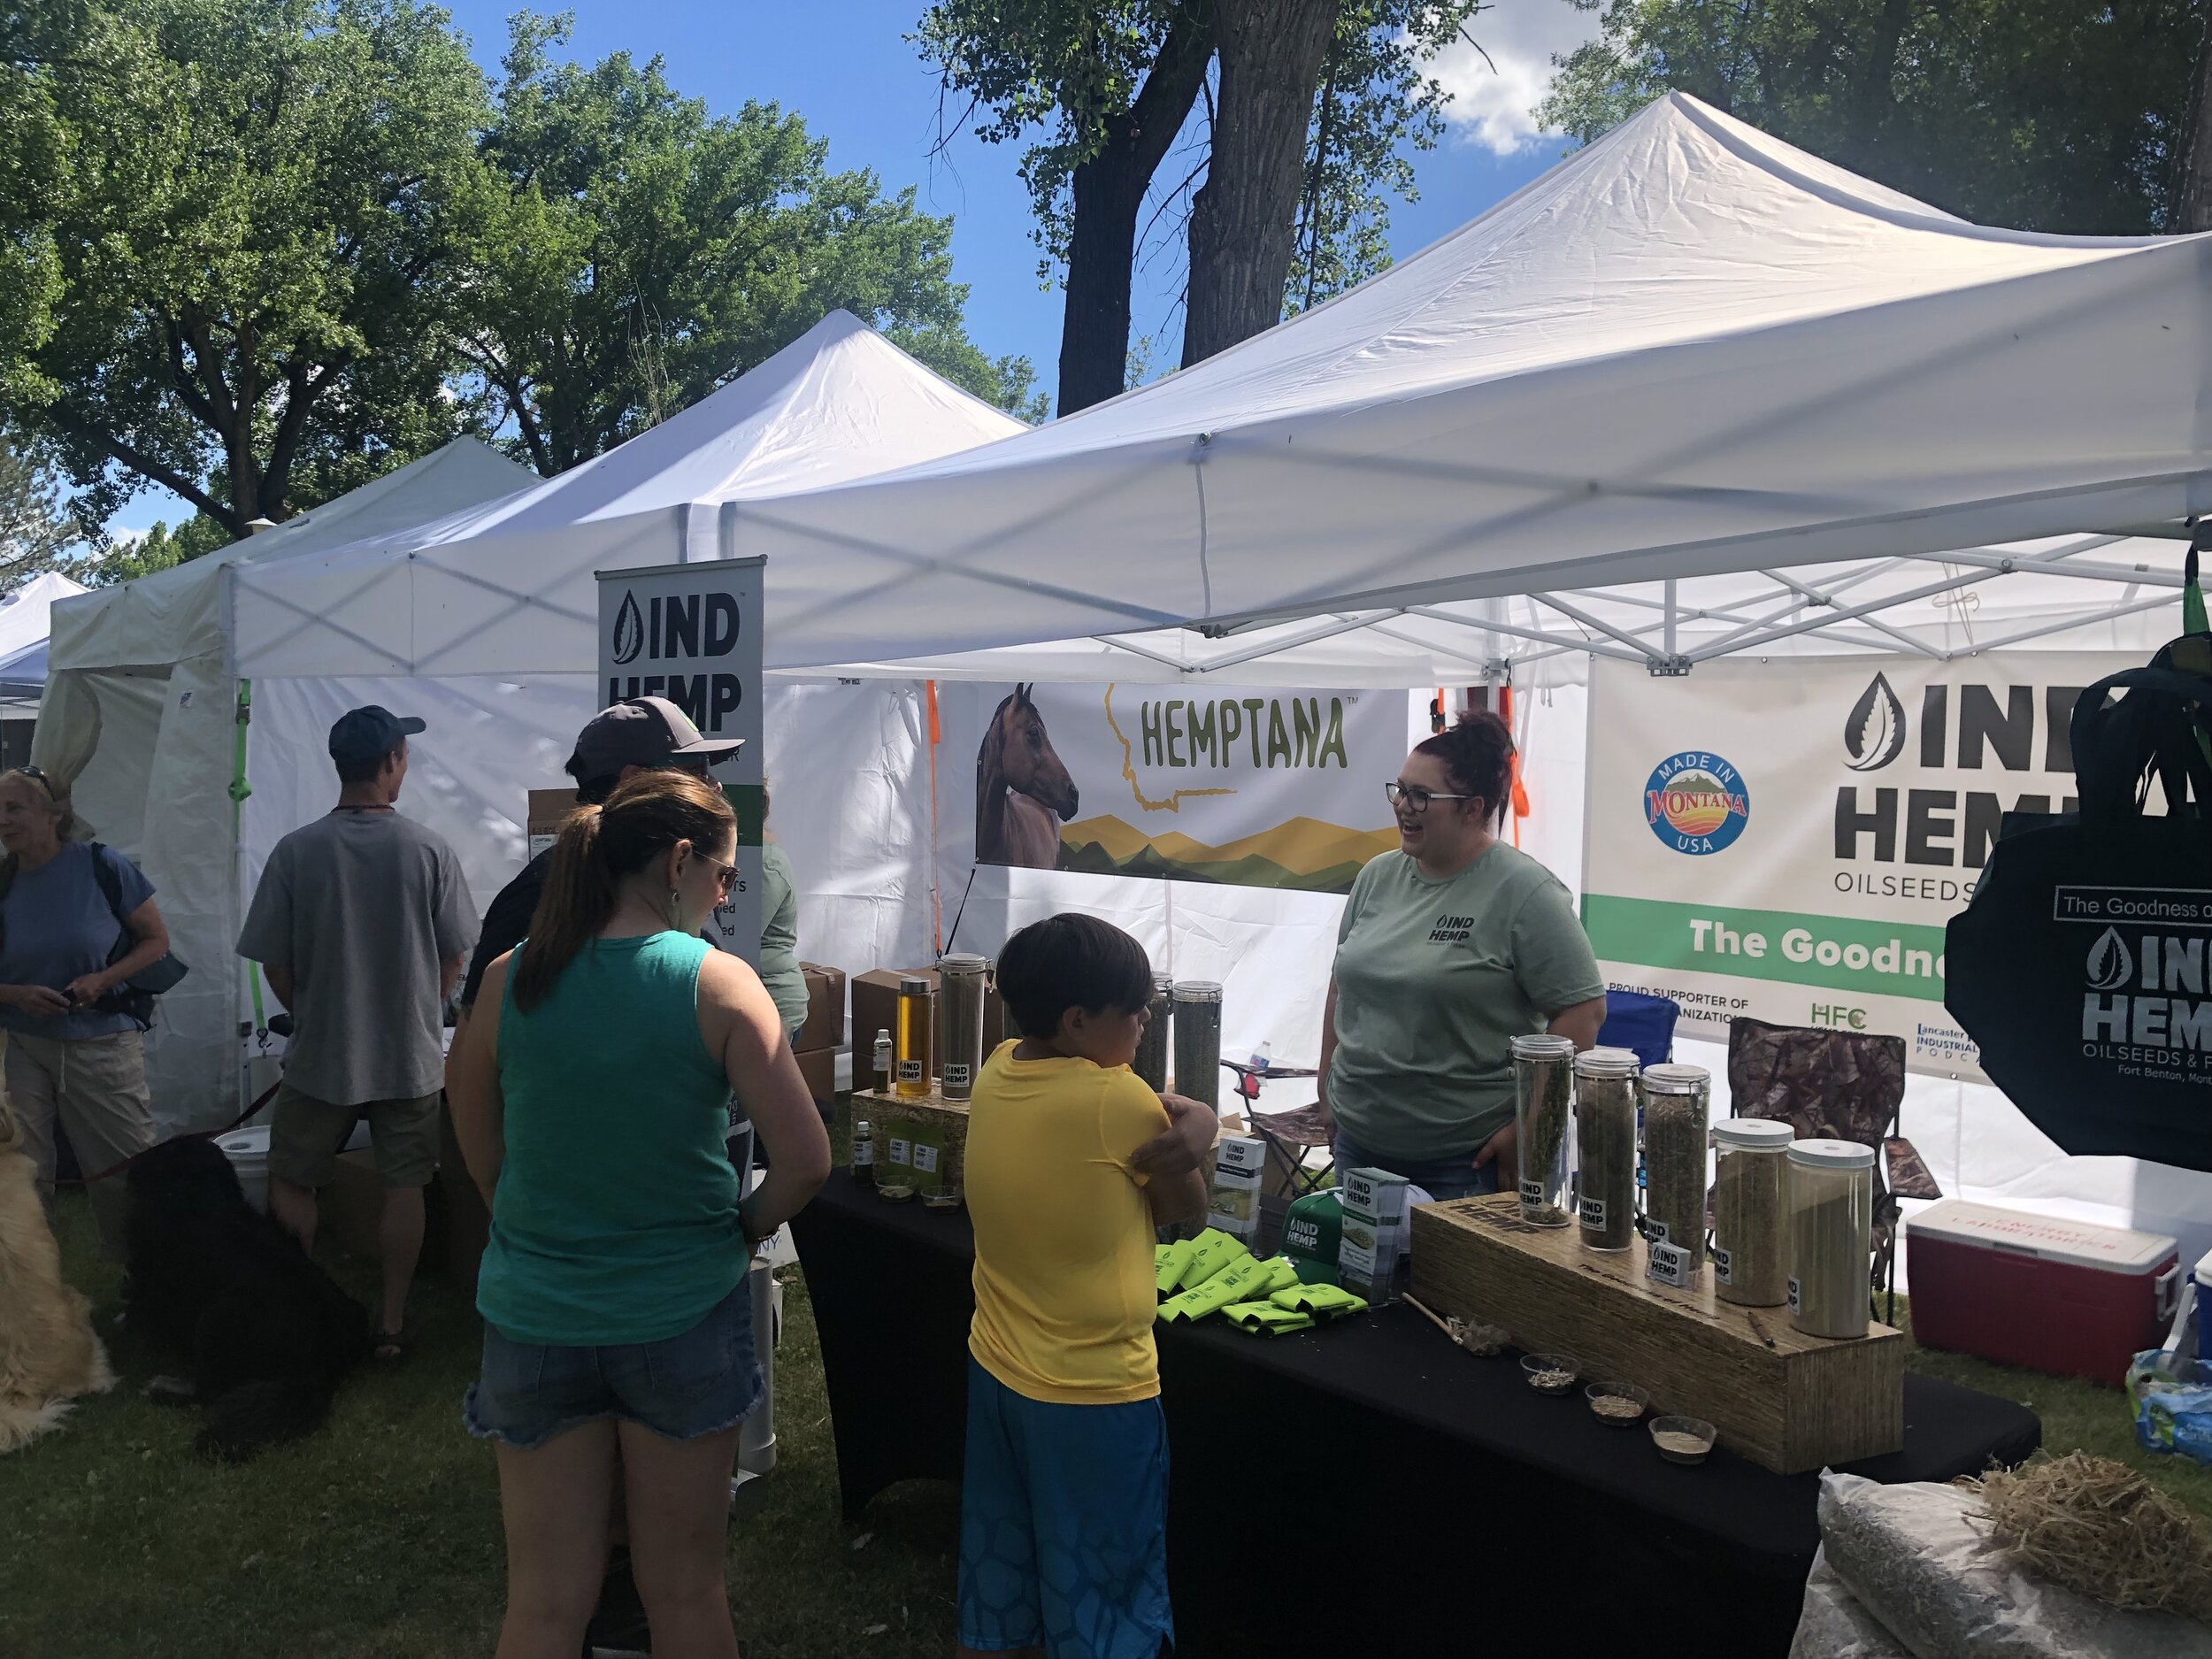 The IND HEMP and HEMPTANA booths showcasing their products at the Summer Celebration. Photo by Jordee Bomgardner.